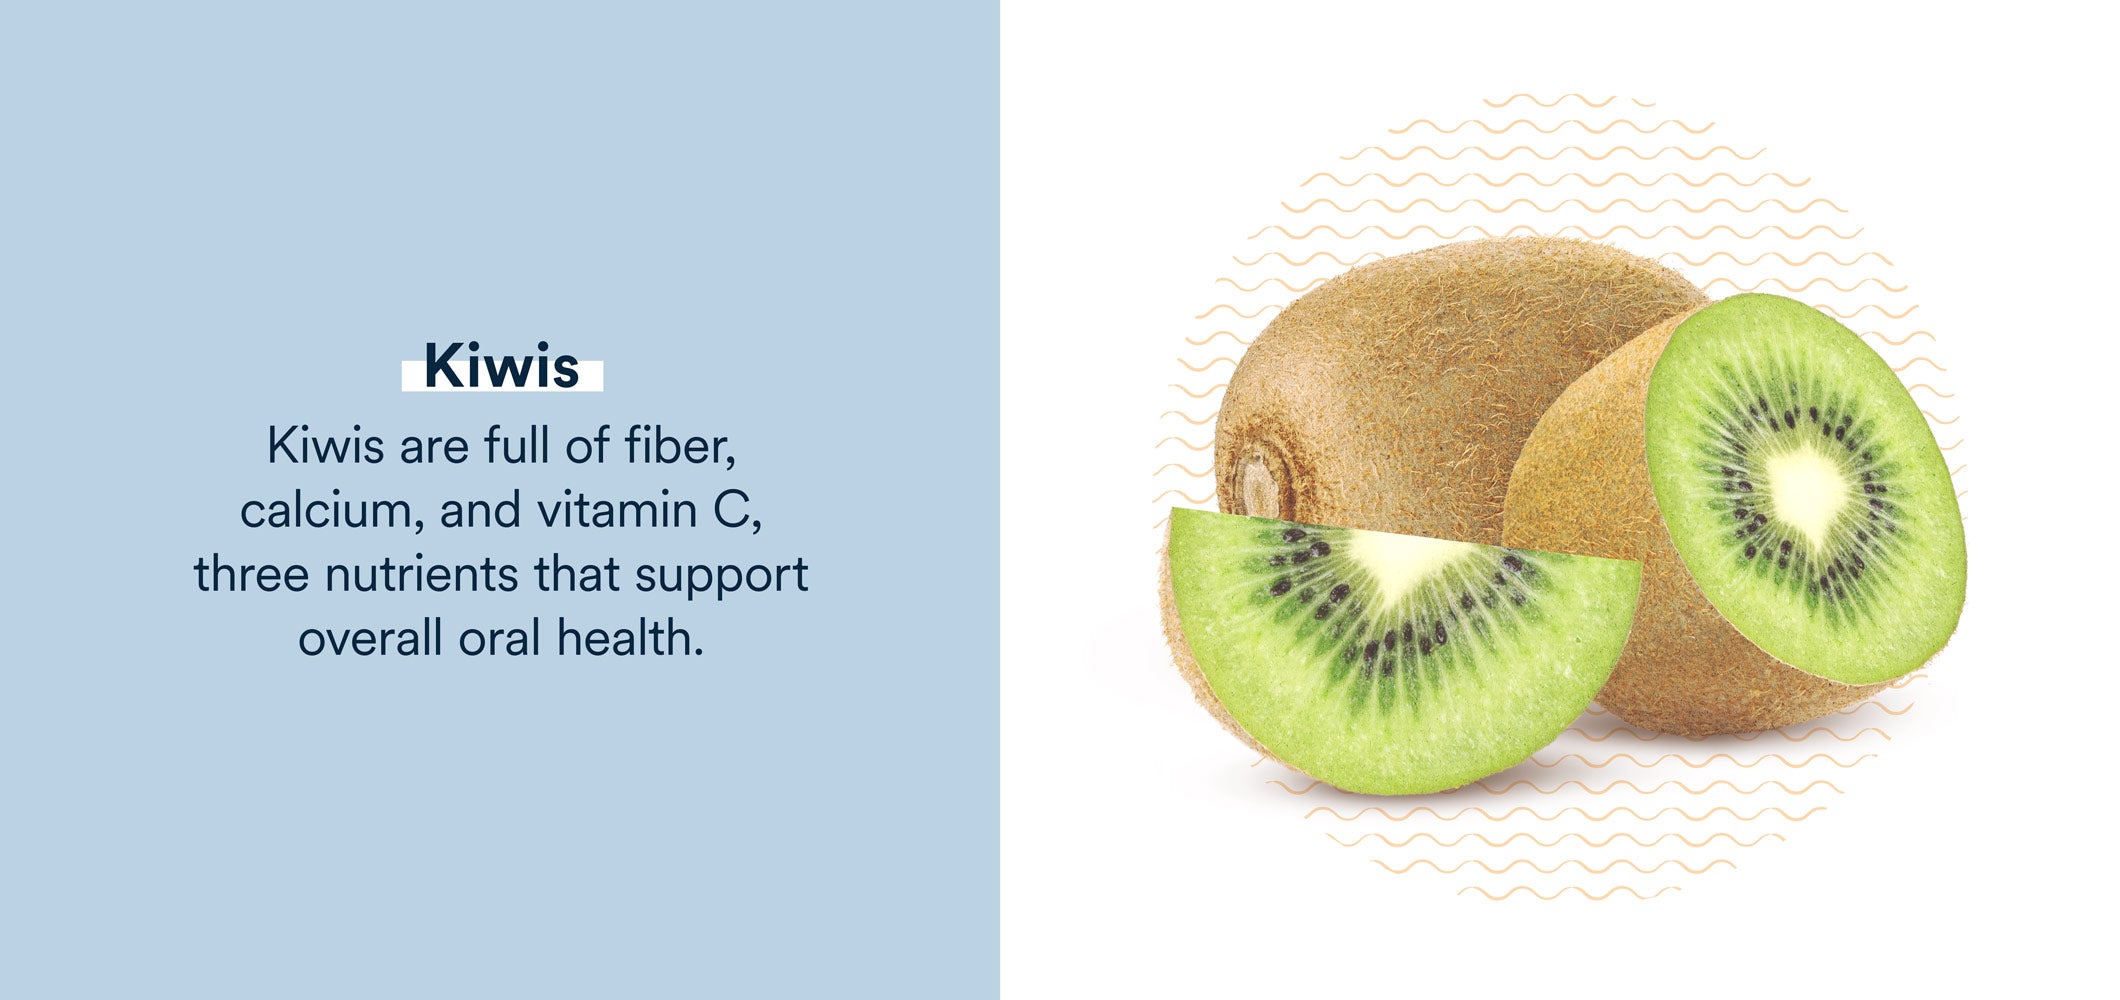 kiwis are full of nutrients that support oral health